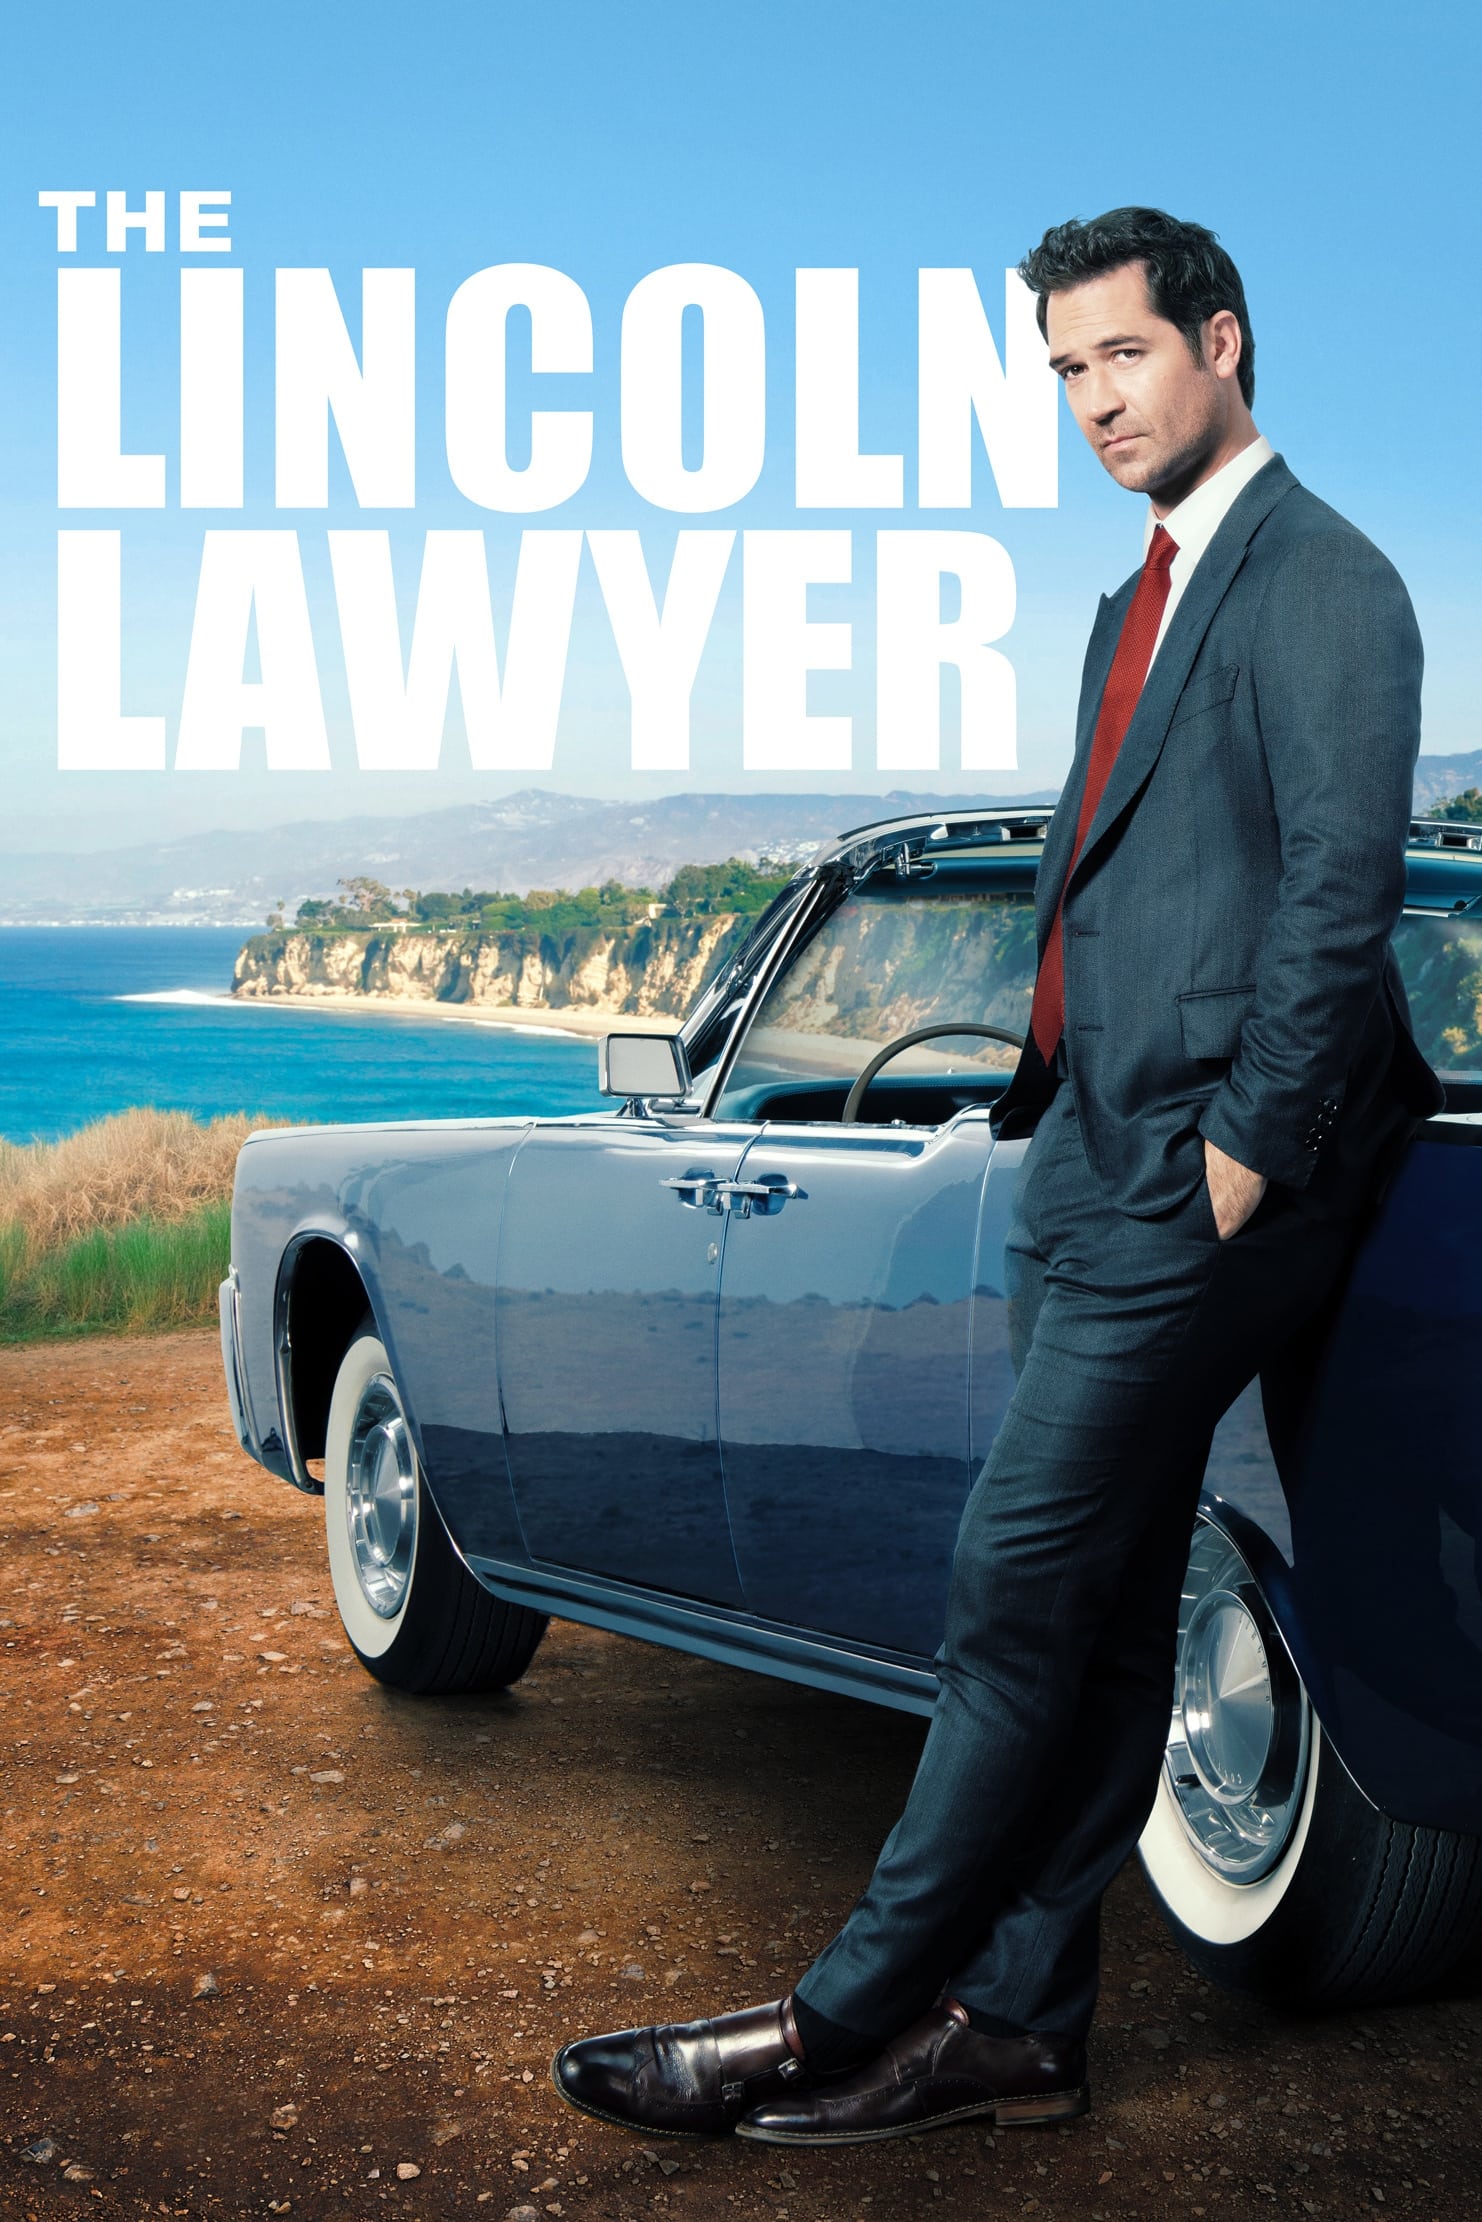 The Lincoln Lawyer TV Shows About Lawyer